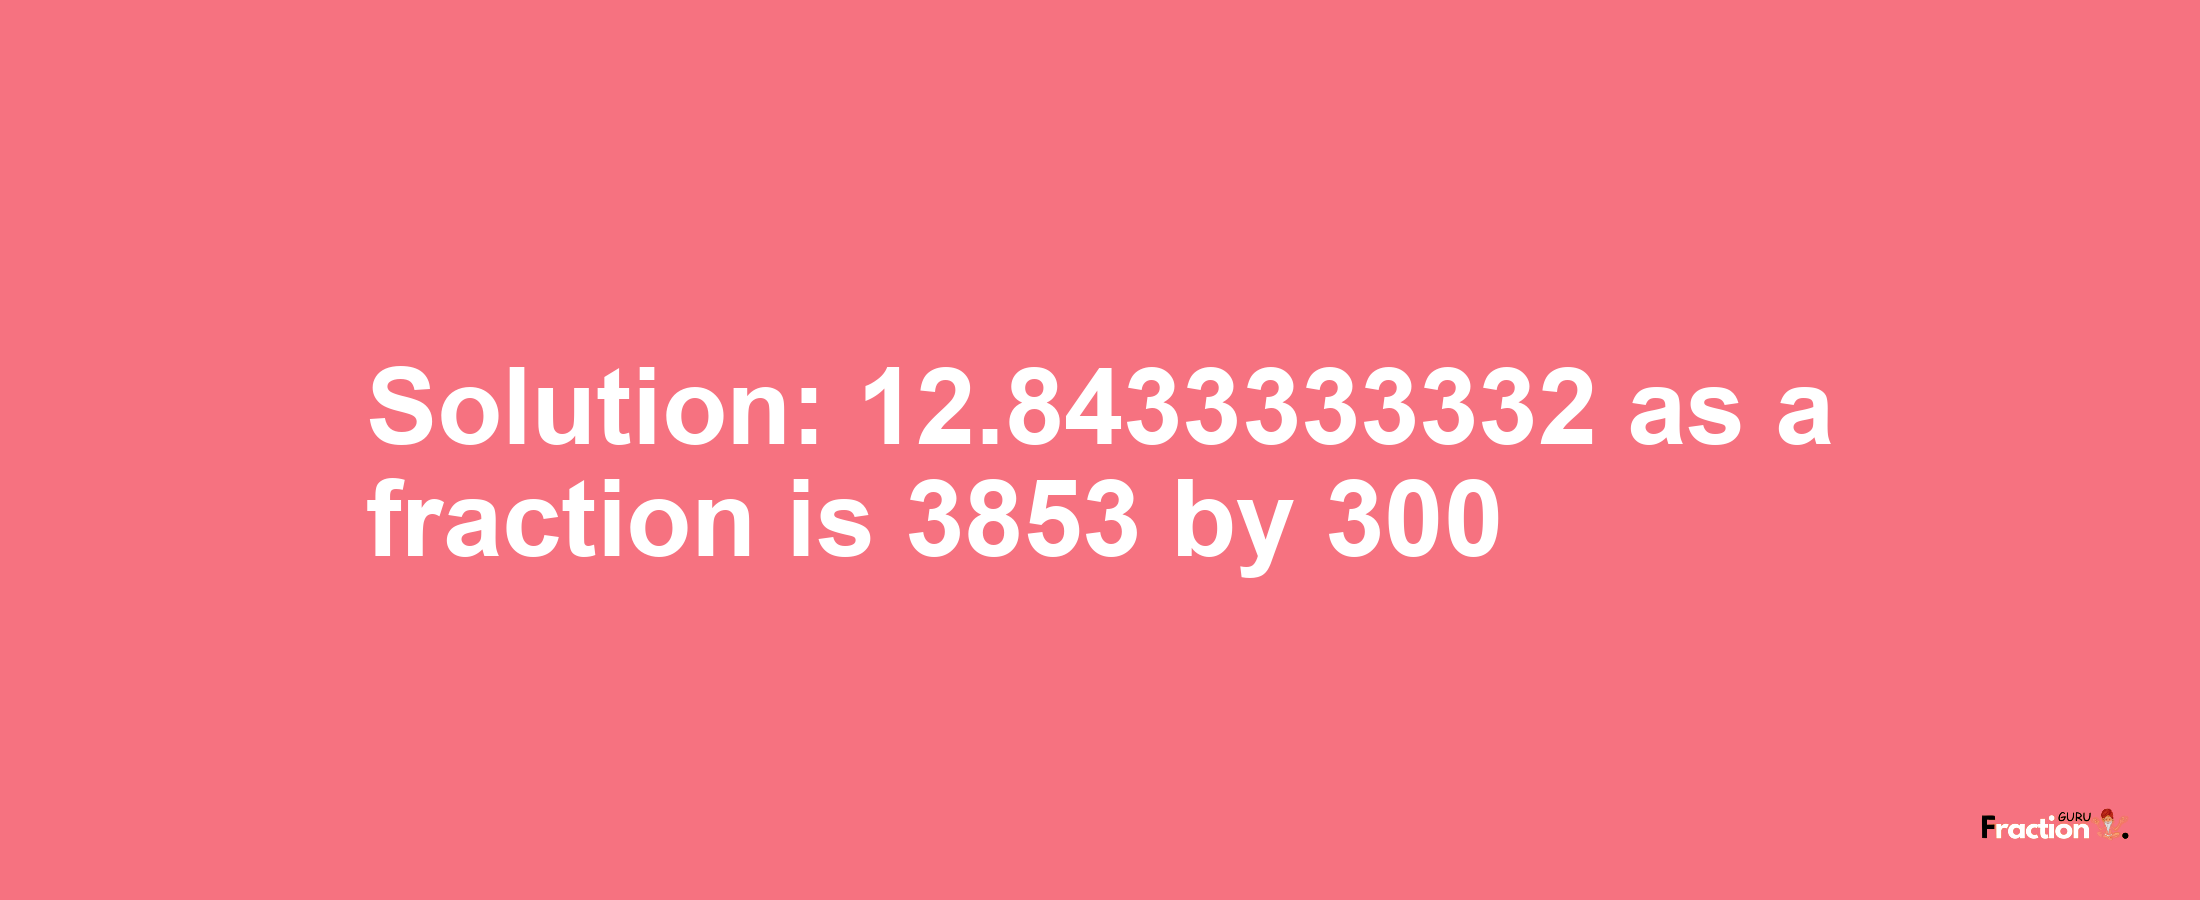 Solution:12.8433333332 as a fraction is 3853/300